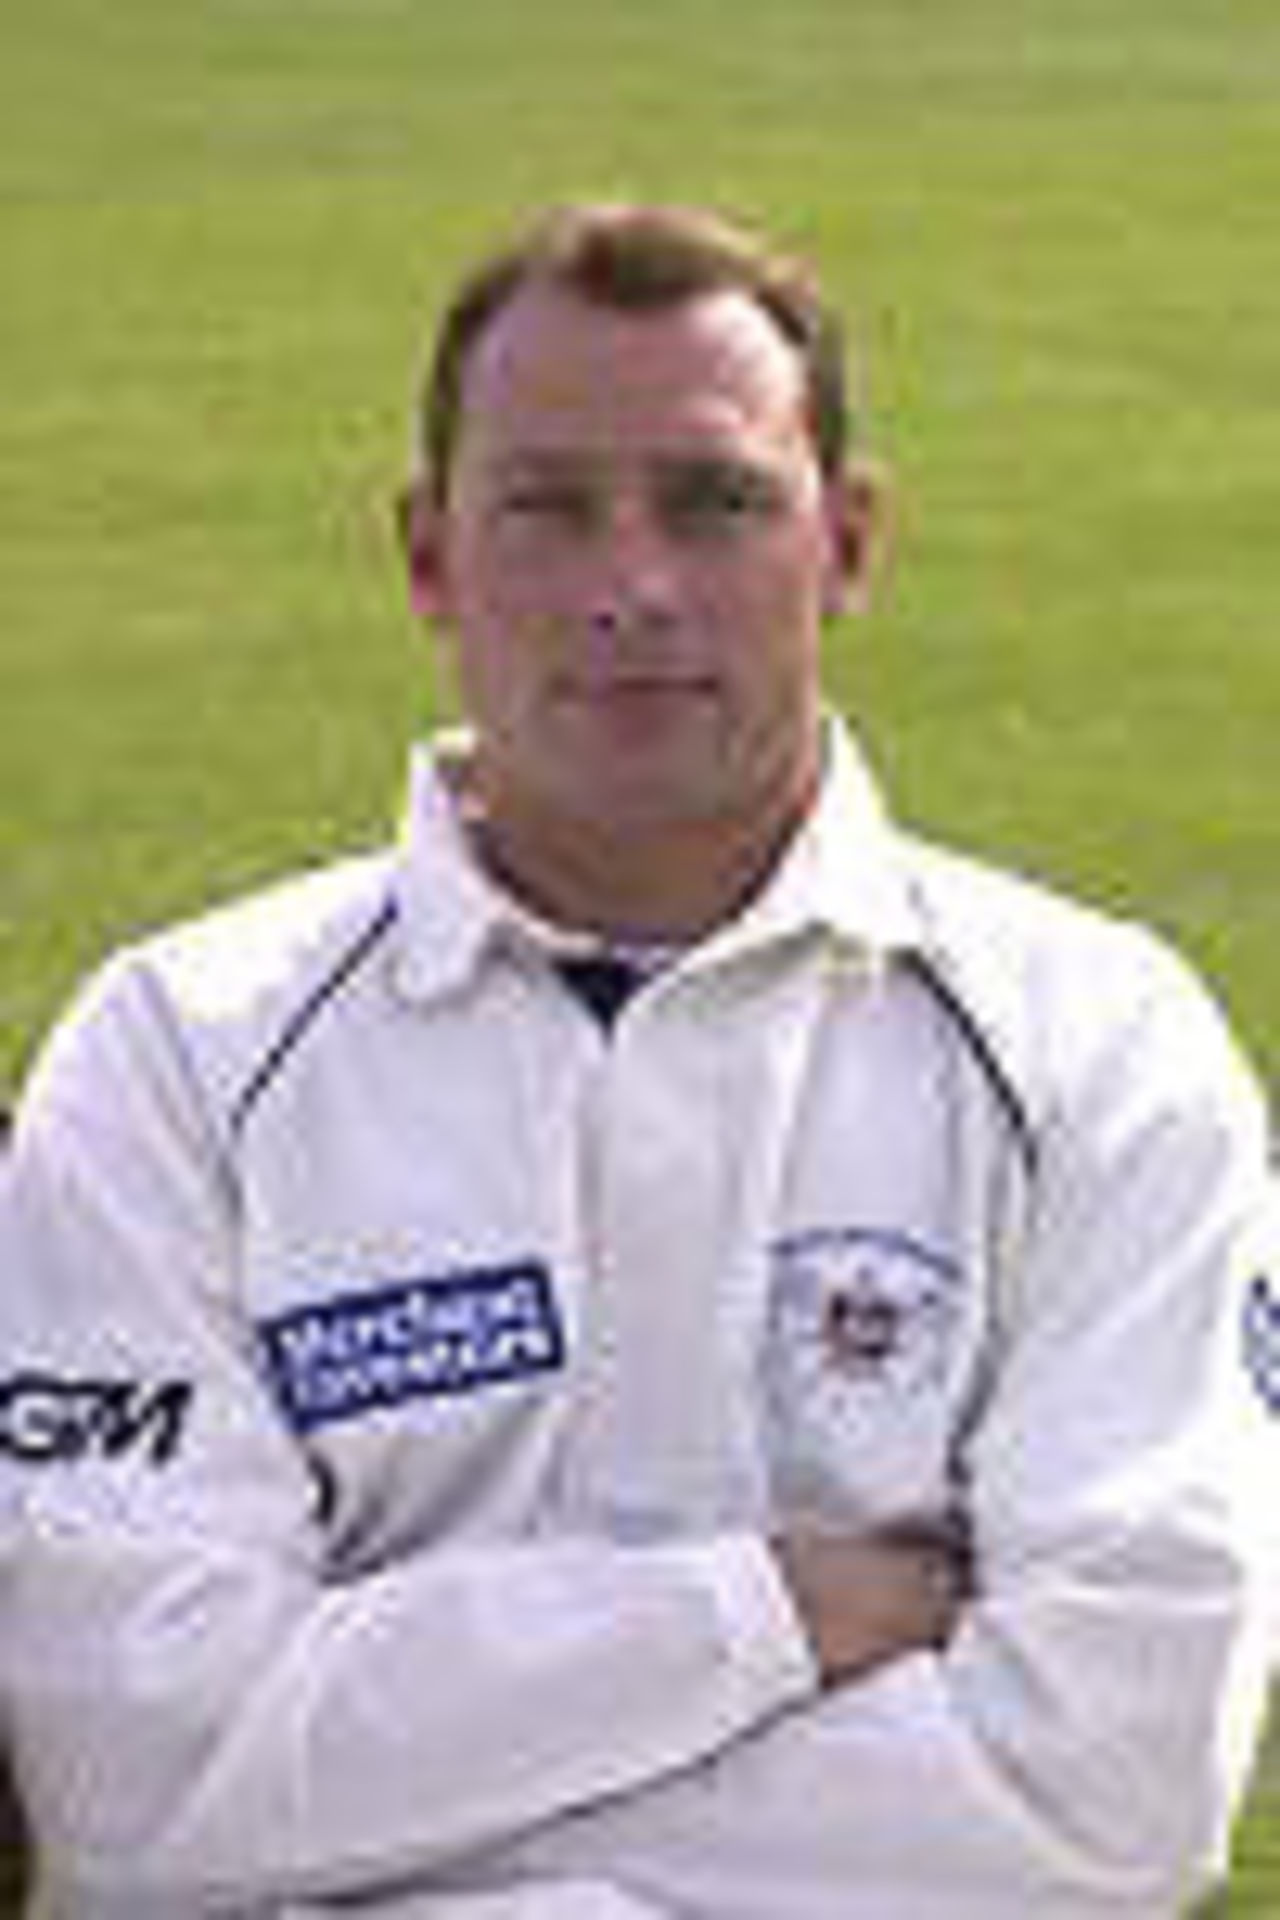 Taken at the Gloucestershire CCC Photocall April 2001